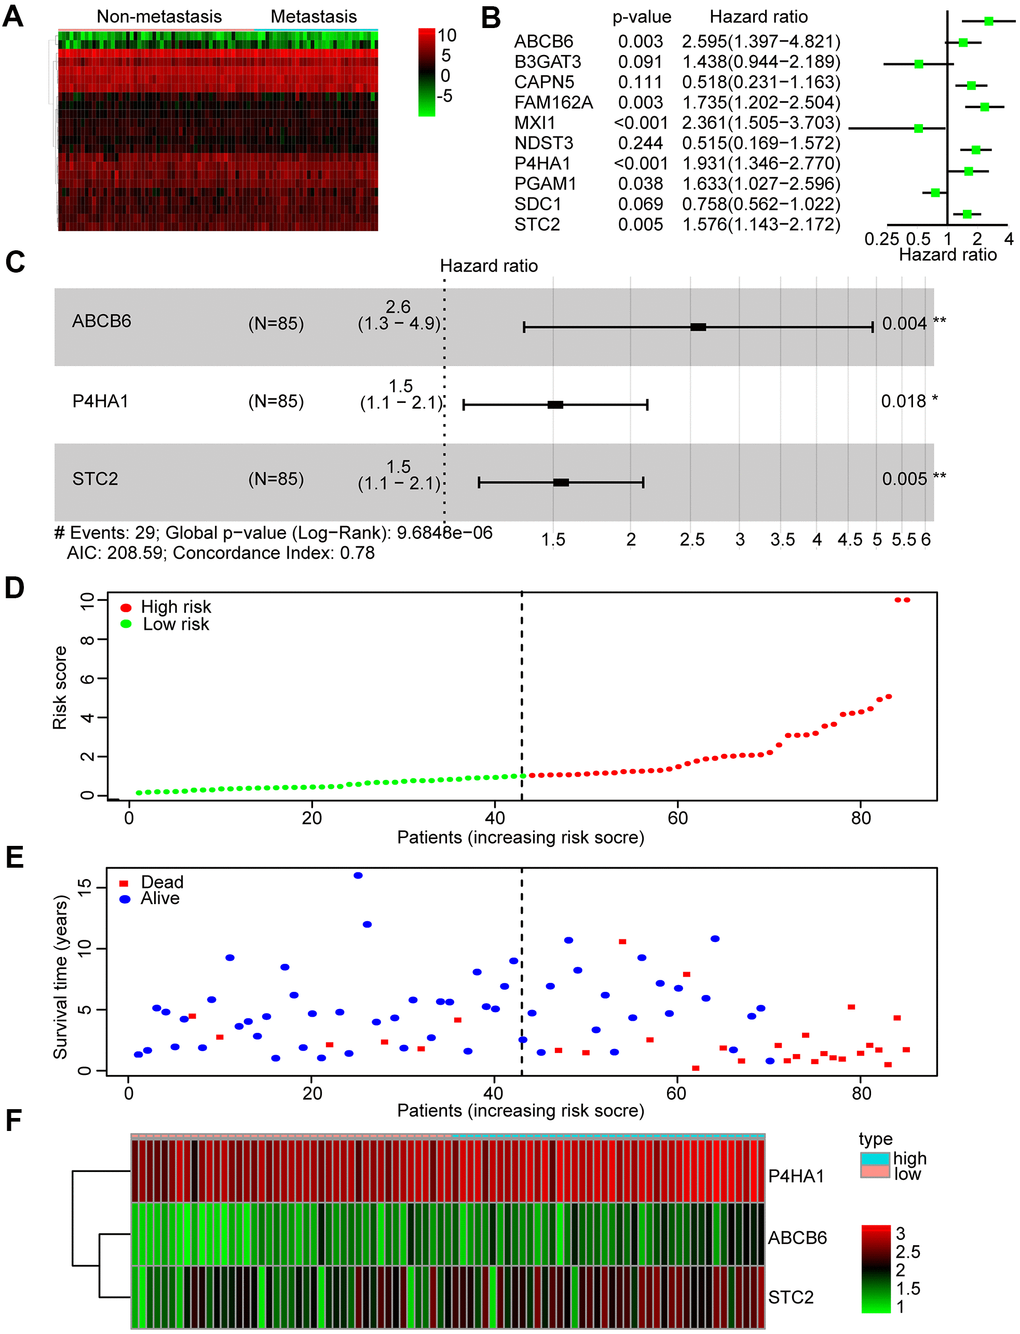 Identification and construction of a three-mRNA signature to predict the prognosis of patients with OS. (A) Heatmap was constructed showing 23 differentially expressed glycolysis-related genes in metastasis OS tissues compared with non-metastasis tissues. (B) Forest plot of univariate Cox regression analysis of the survival-related 10 differentially expressed genes in OS. (C) Multivariate cox regression analysis identified a risk signature include 3 glycolysis-related genes among the 10 differentially expressed genes. (D) Distribution of risk score in the high-risk group and the low-risk group. (E) Survival status between the high-risk group and the low-risk group. (F) Heatmap of the expression profile of the included glycolysis-related genes.